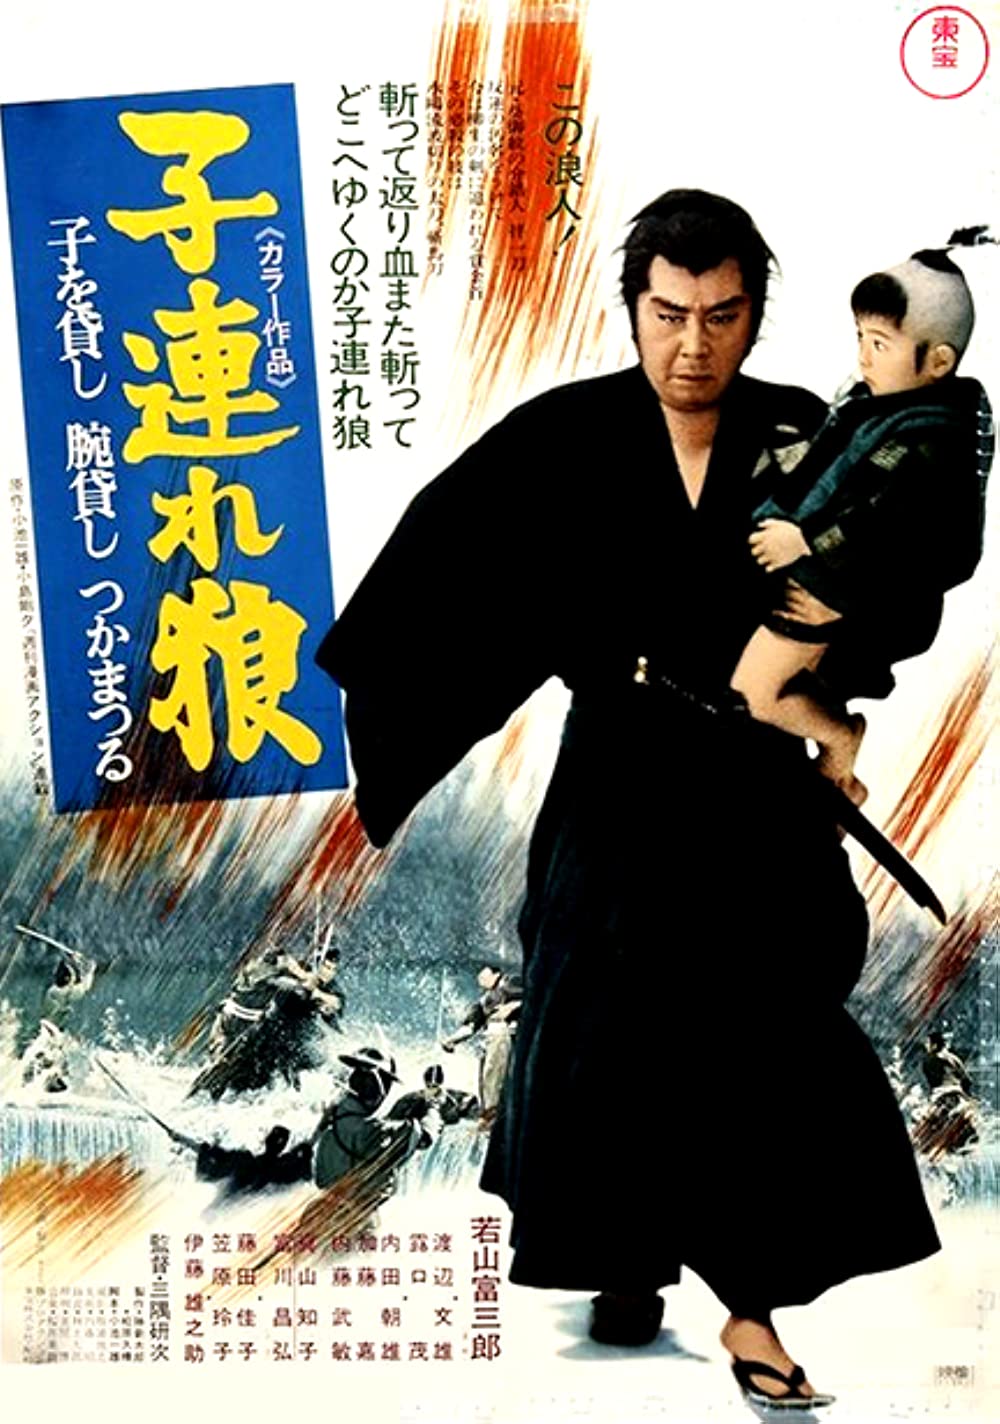 Film poster for LONE WOLF AND CUB: SWORD OF VENGEANCE (1972)